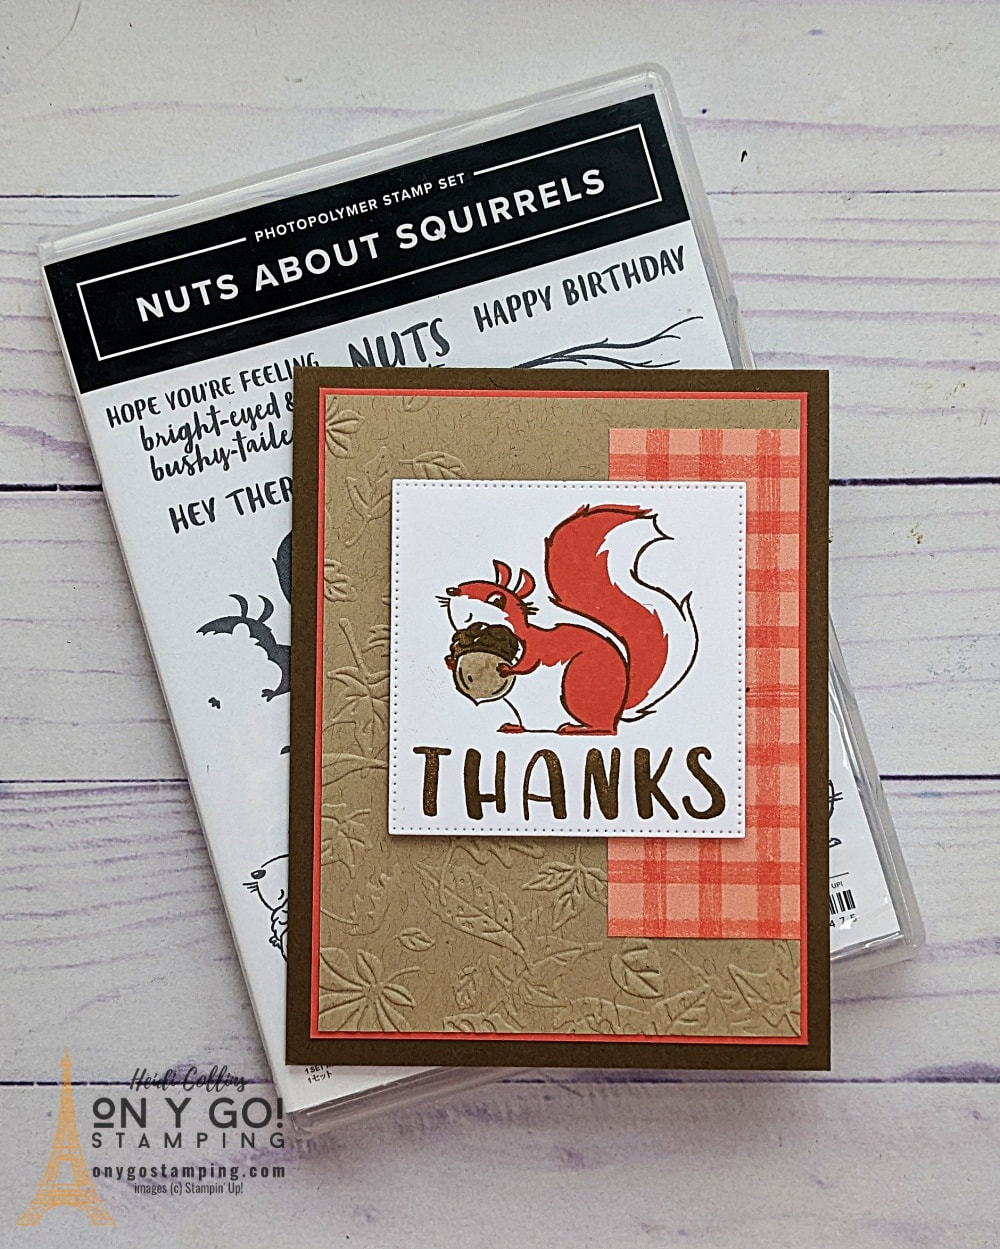 Adorable handmade thank you card for fall made with the Nuts About Squirrels stamp set from Stampin' Up!®